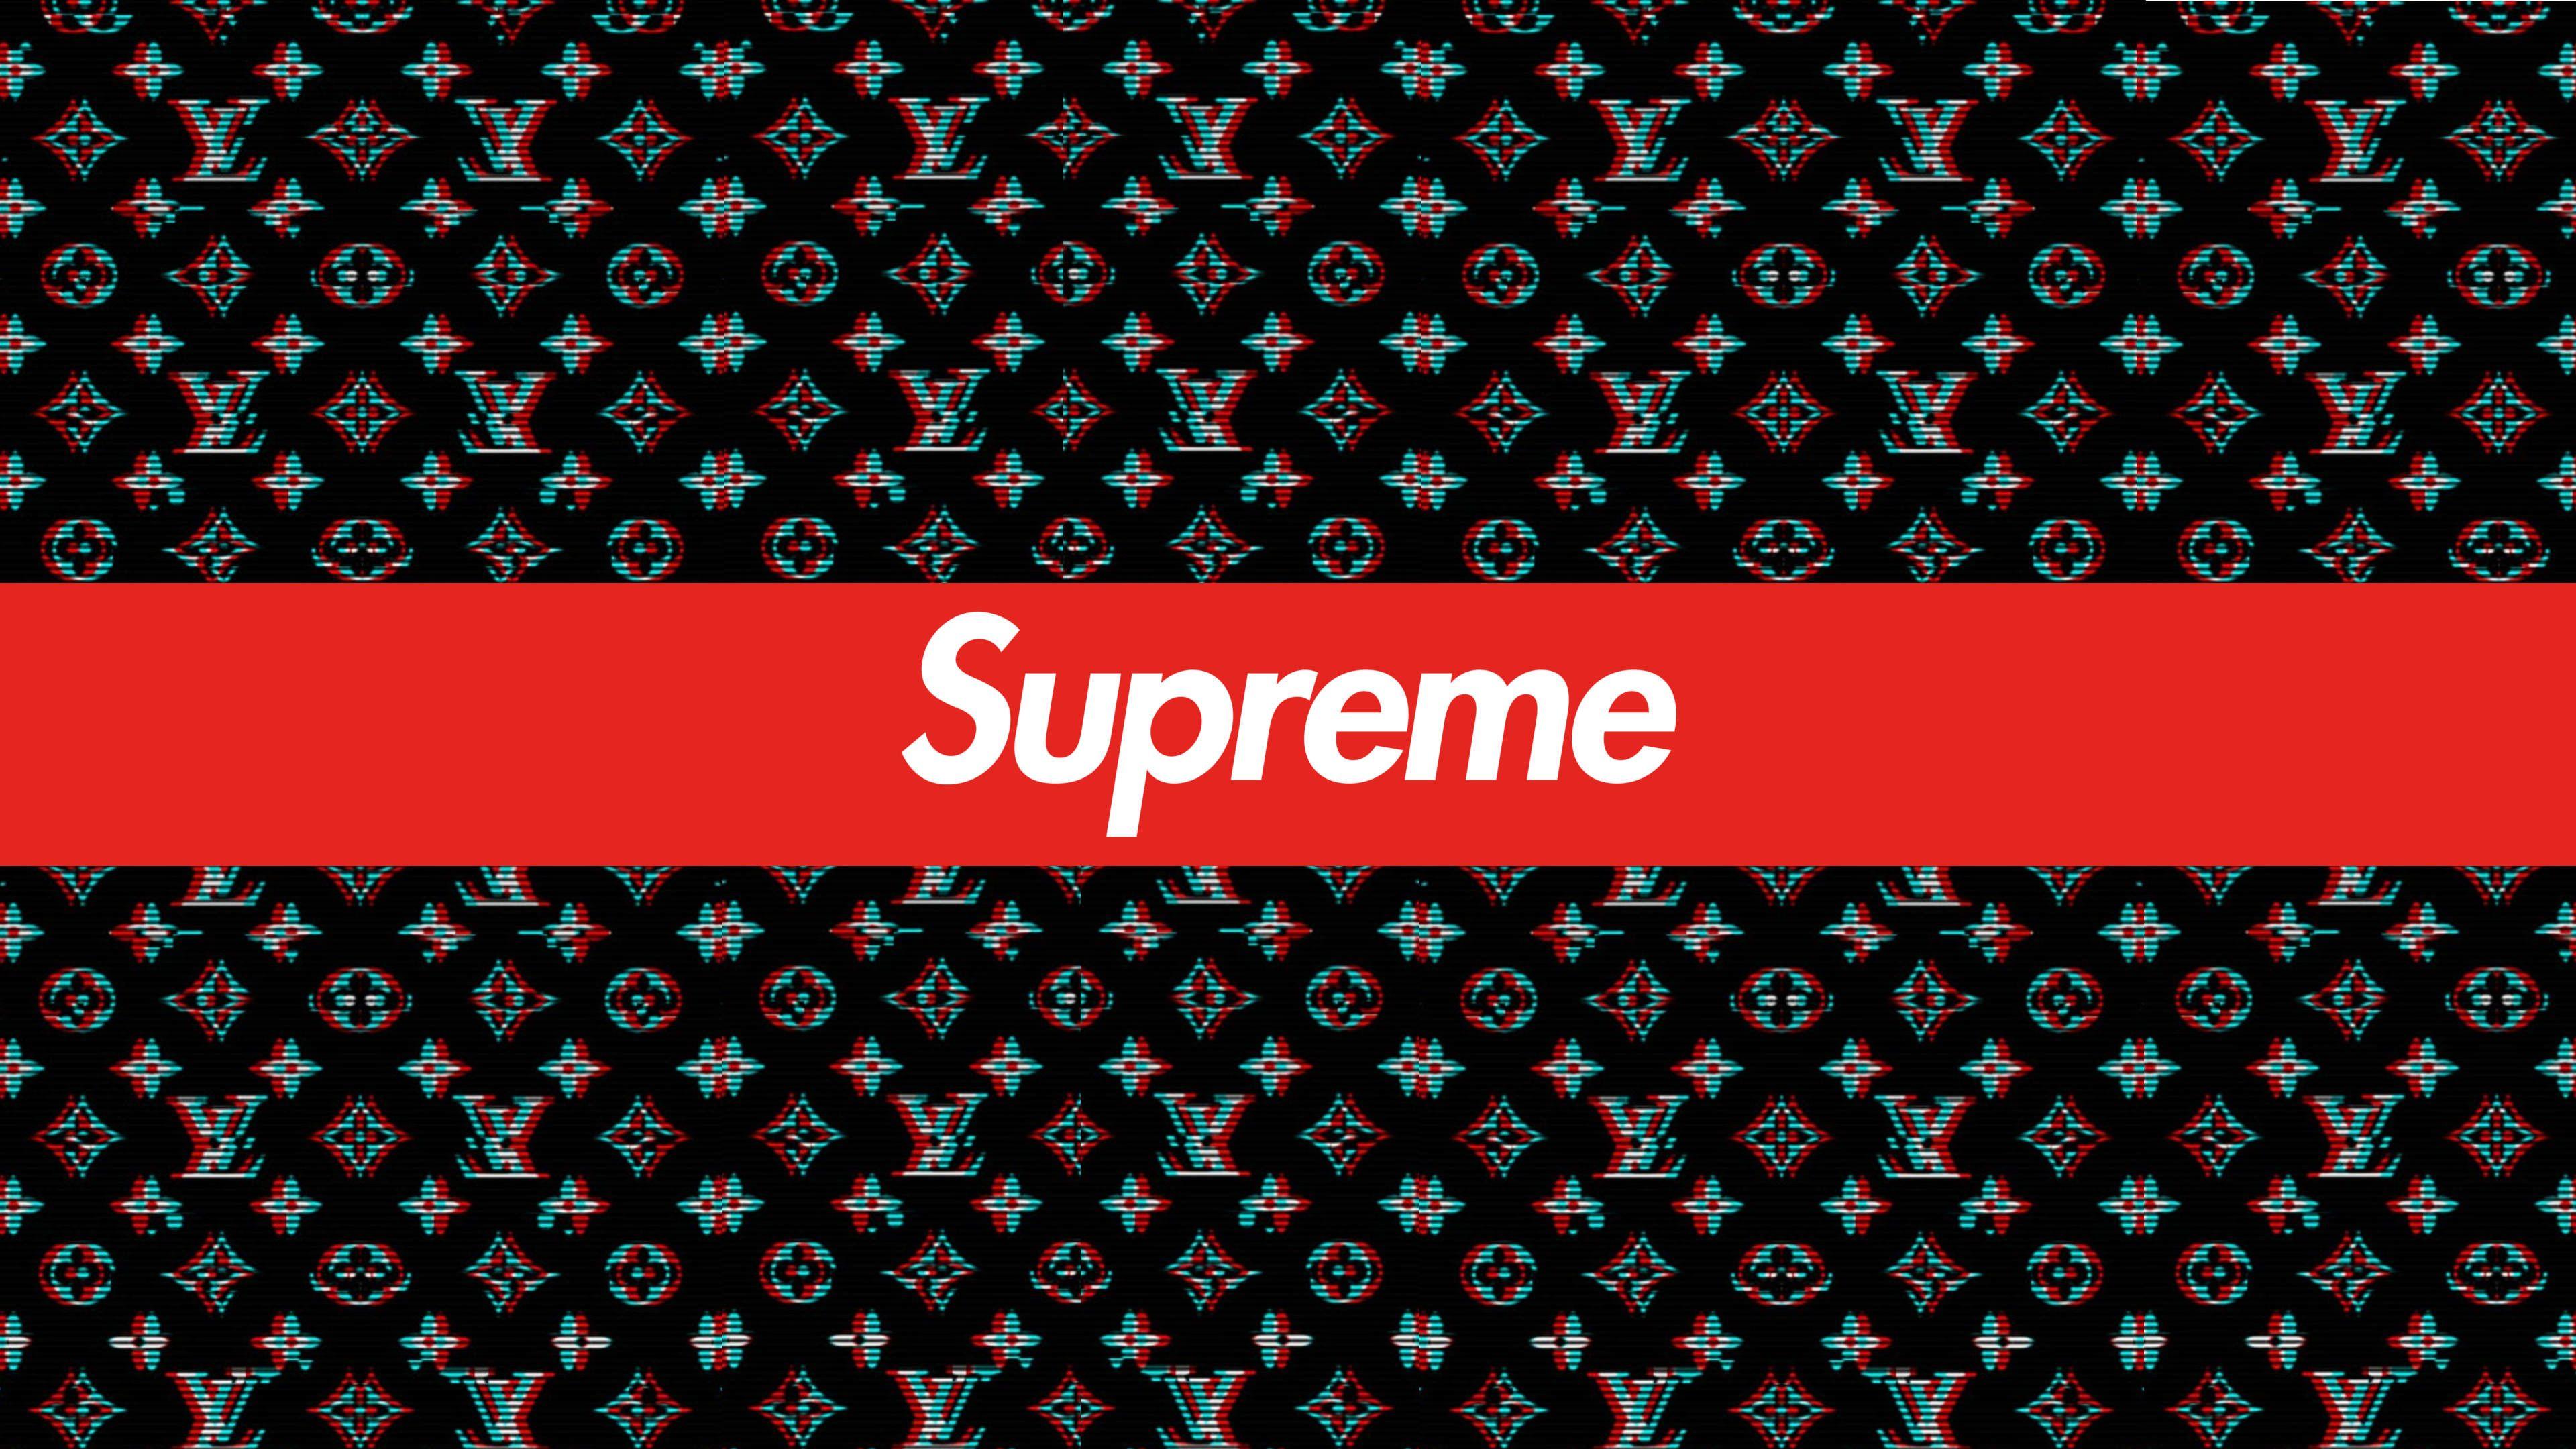 Cool Supreme Wallpapers For Chromebook A collection of the top 70 trippy desktop wallpapers and backgrounds available for download for free. cool supreme wallpapers for chromebook